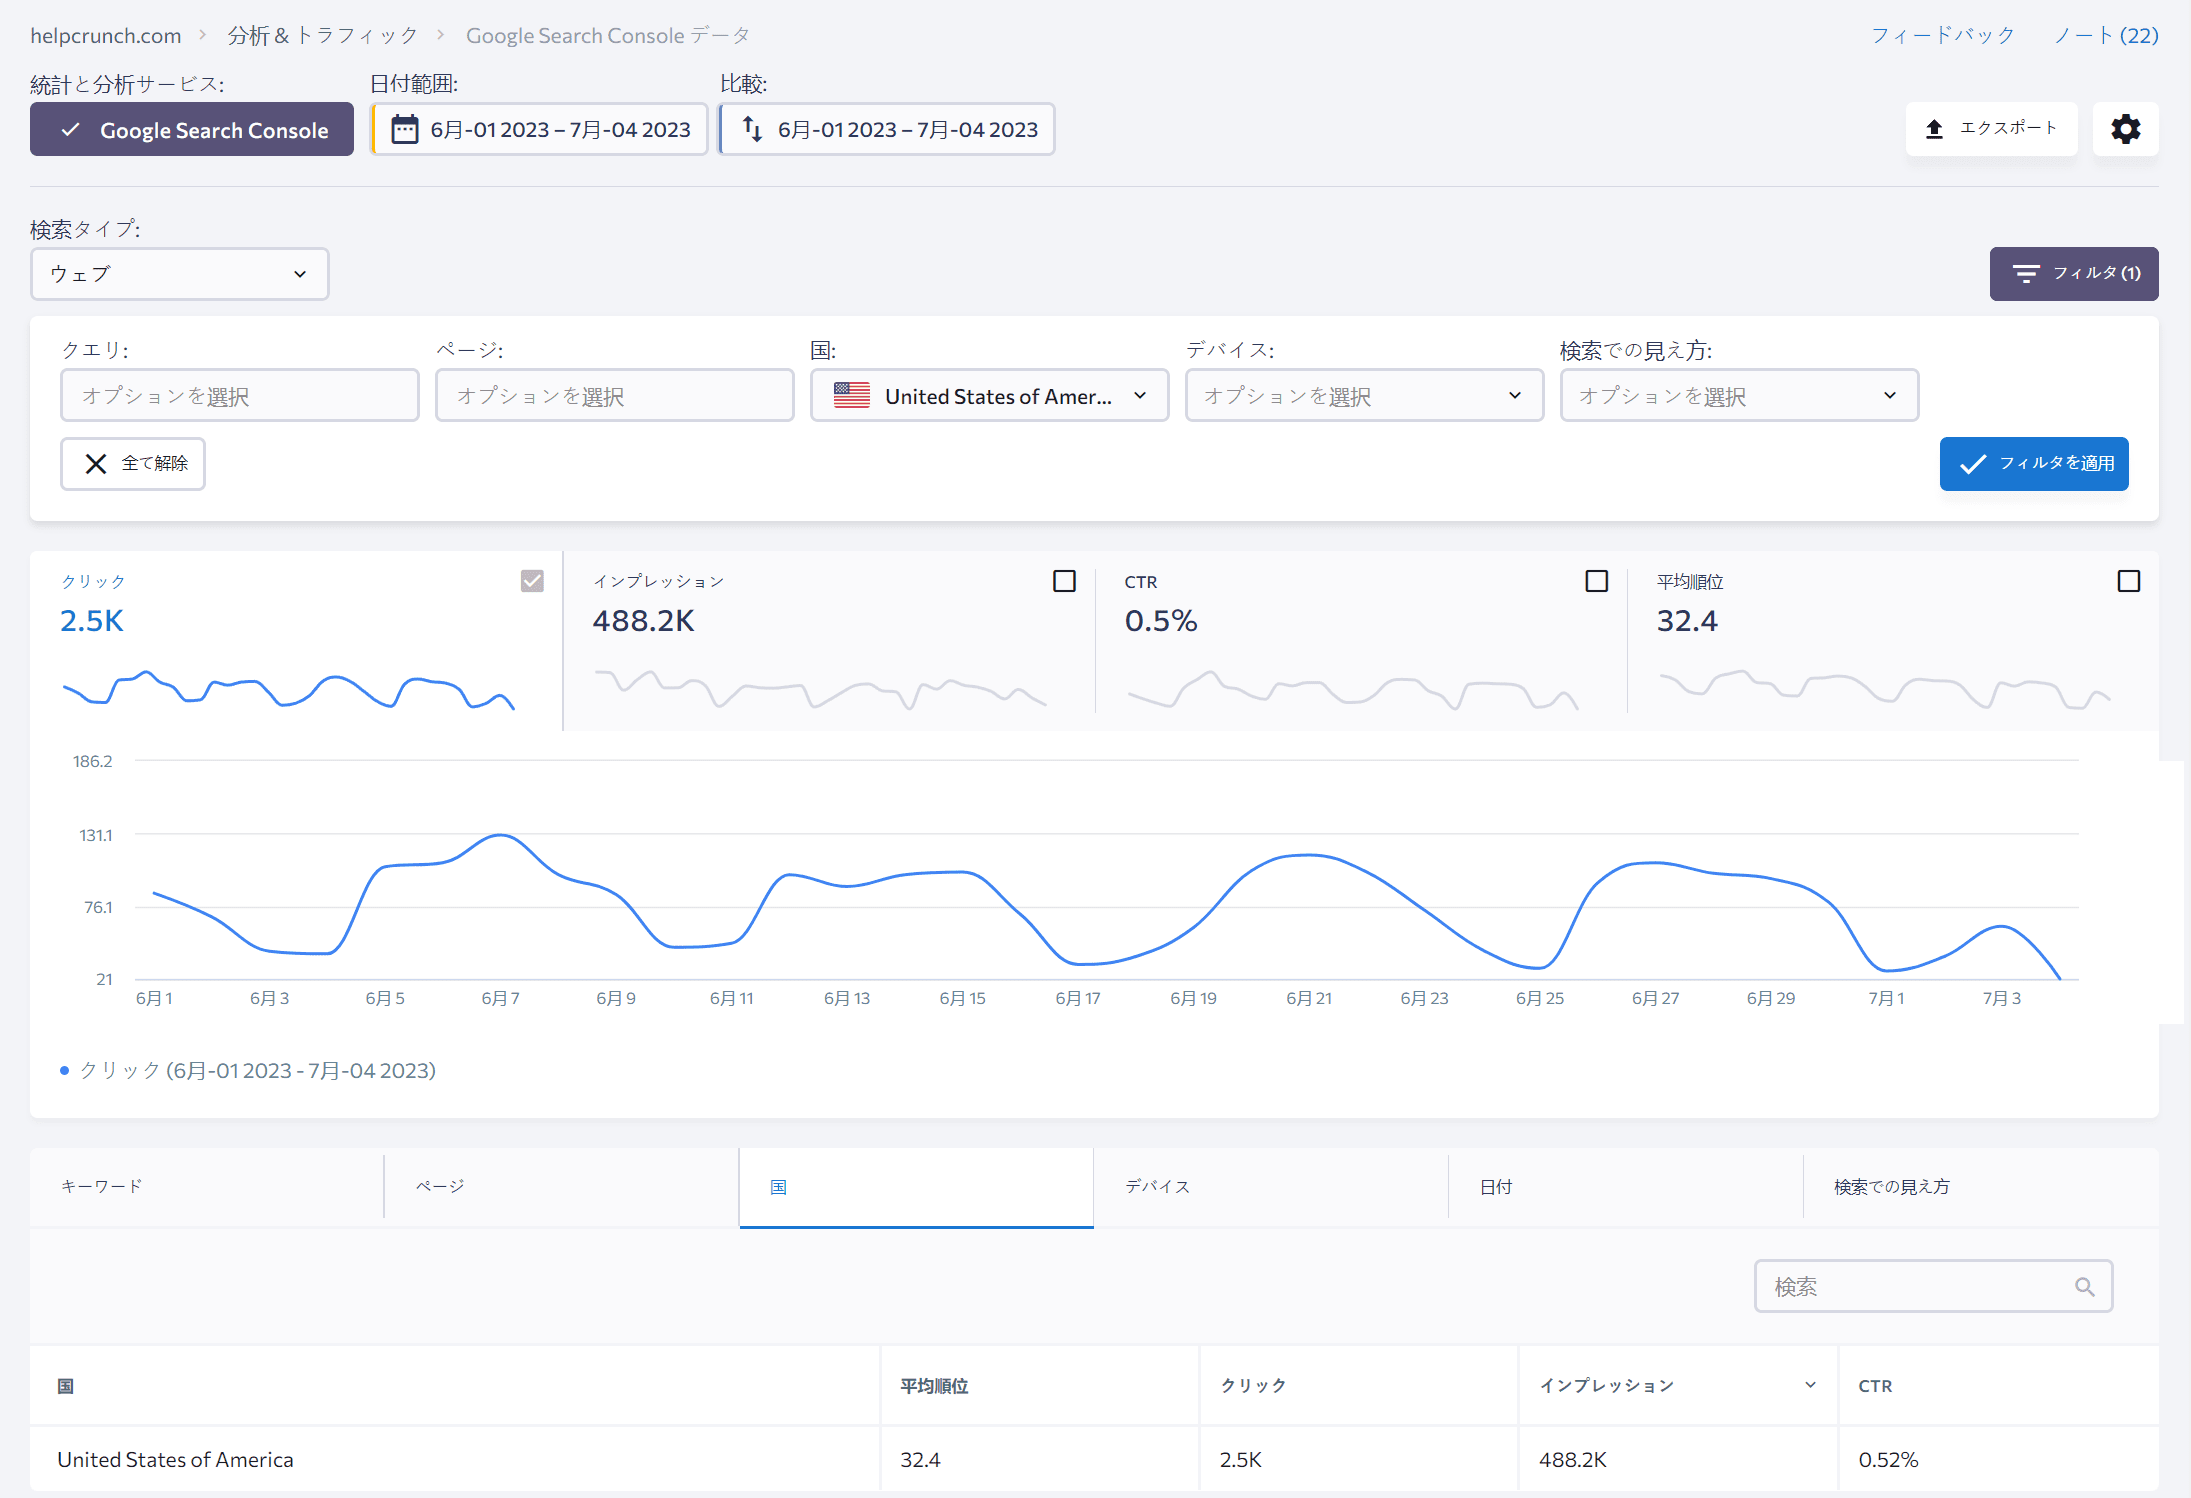 Organic traffic data from GSC